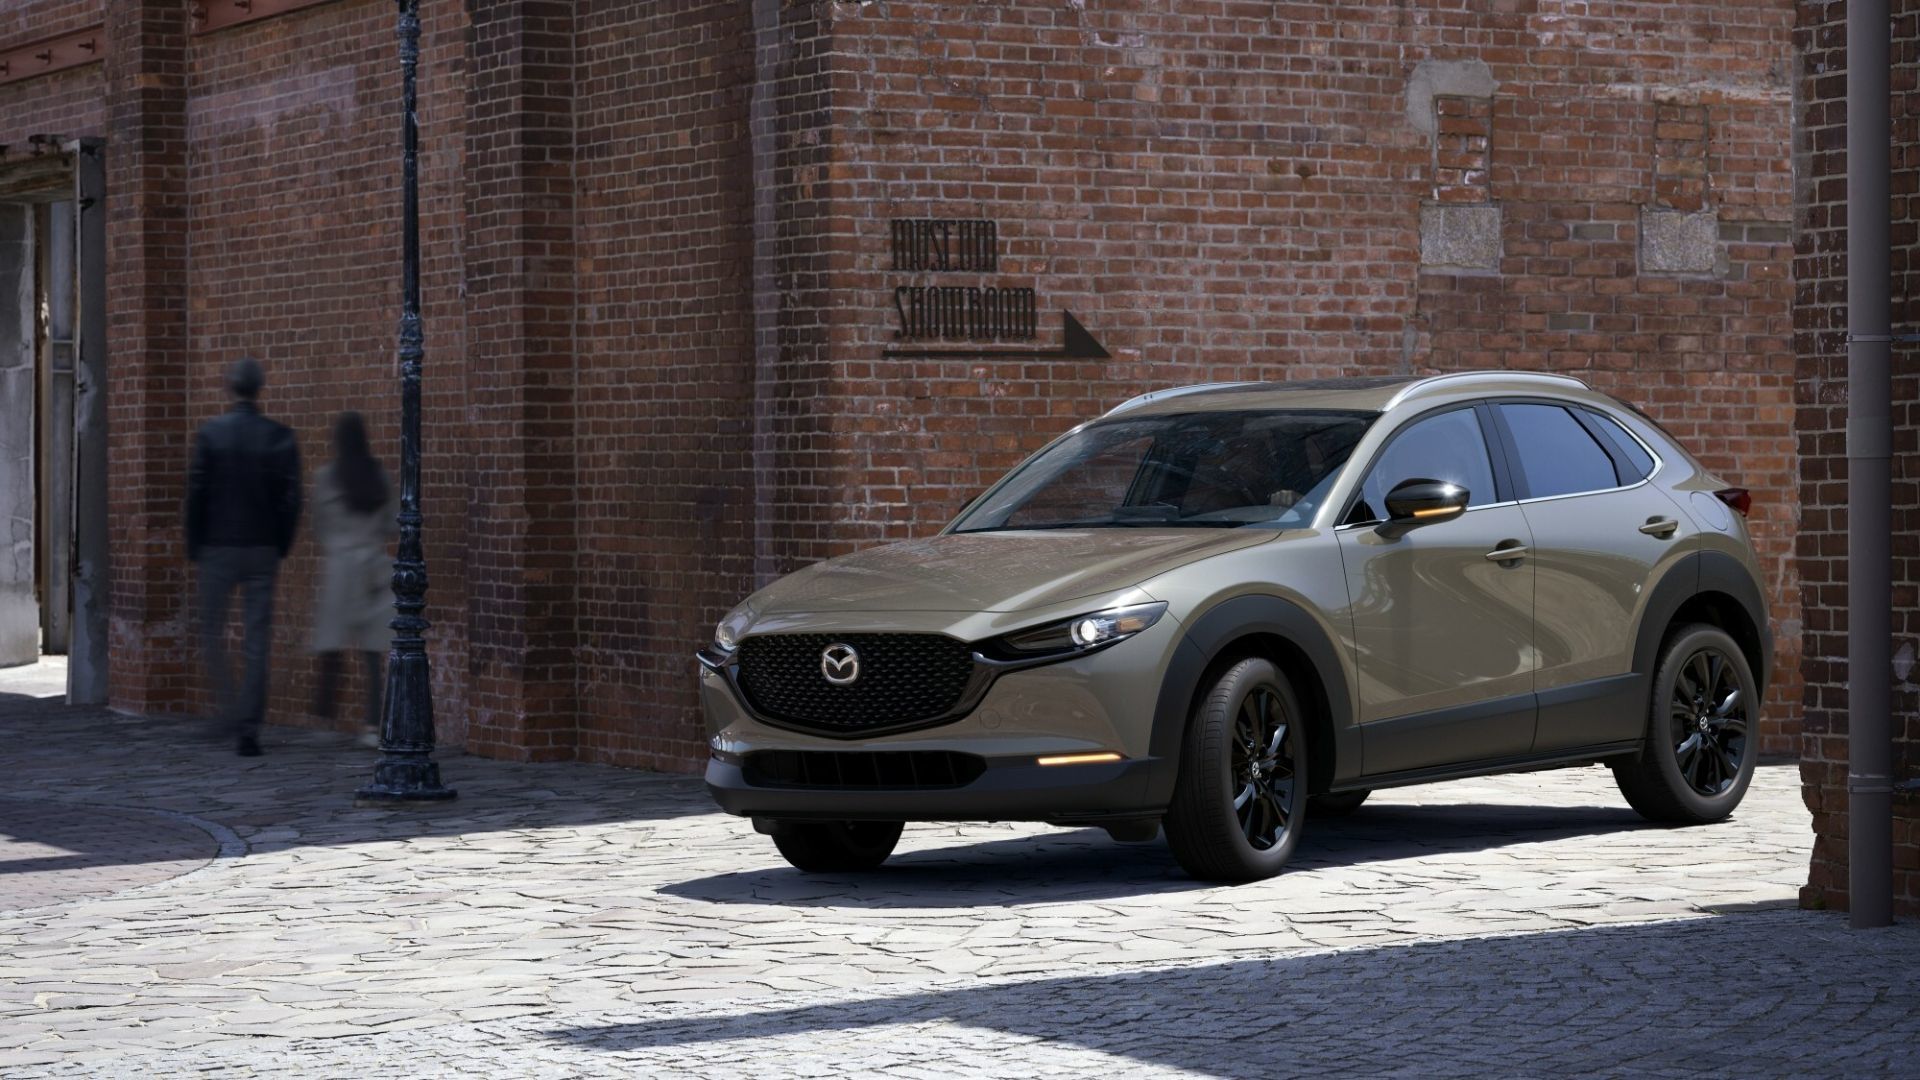 Why Buy a 2024 Mazda Vehicle if Your Current Mazda Lease is Up?